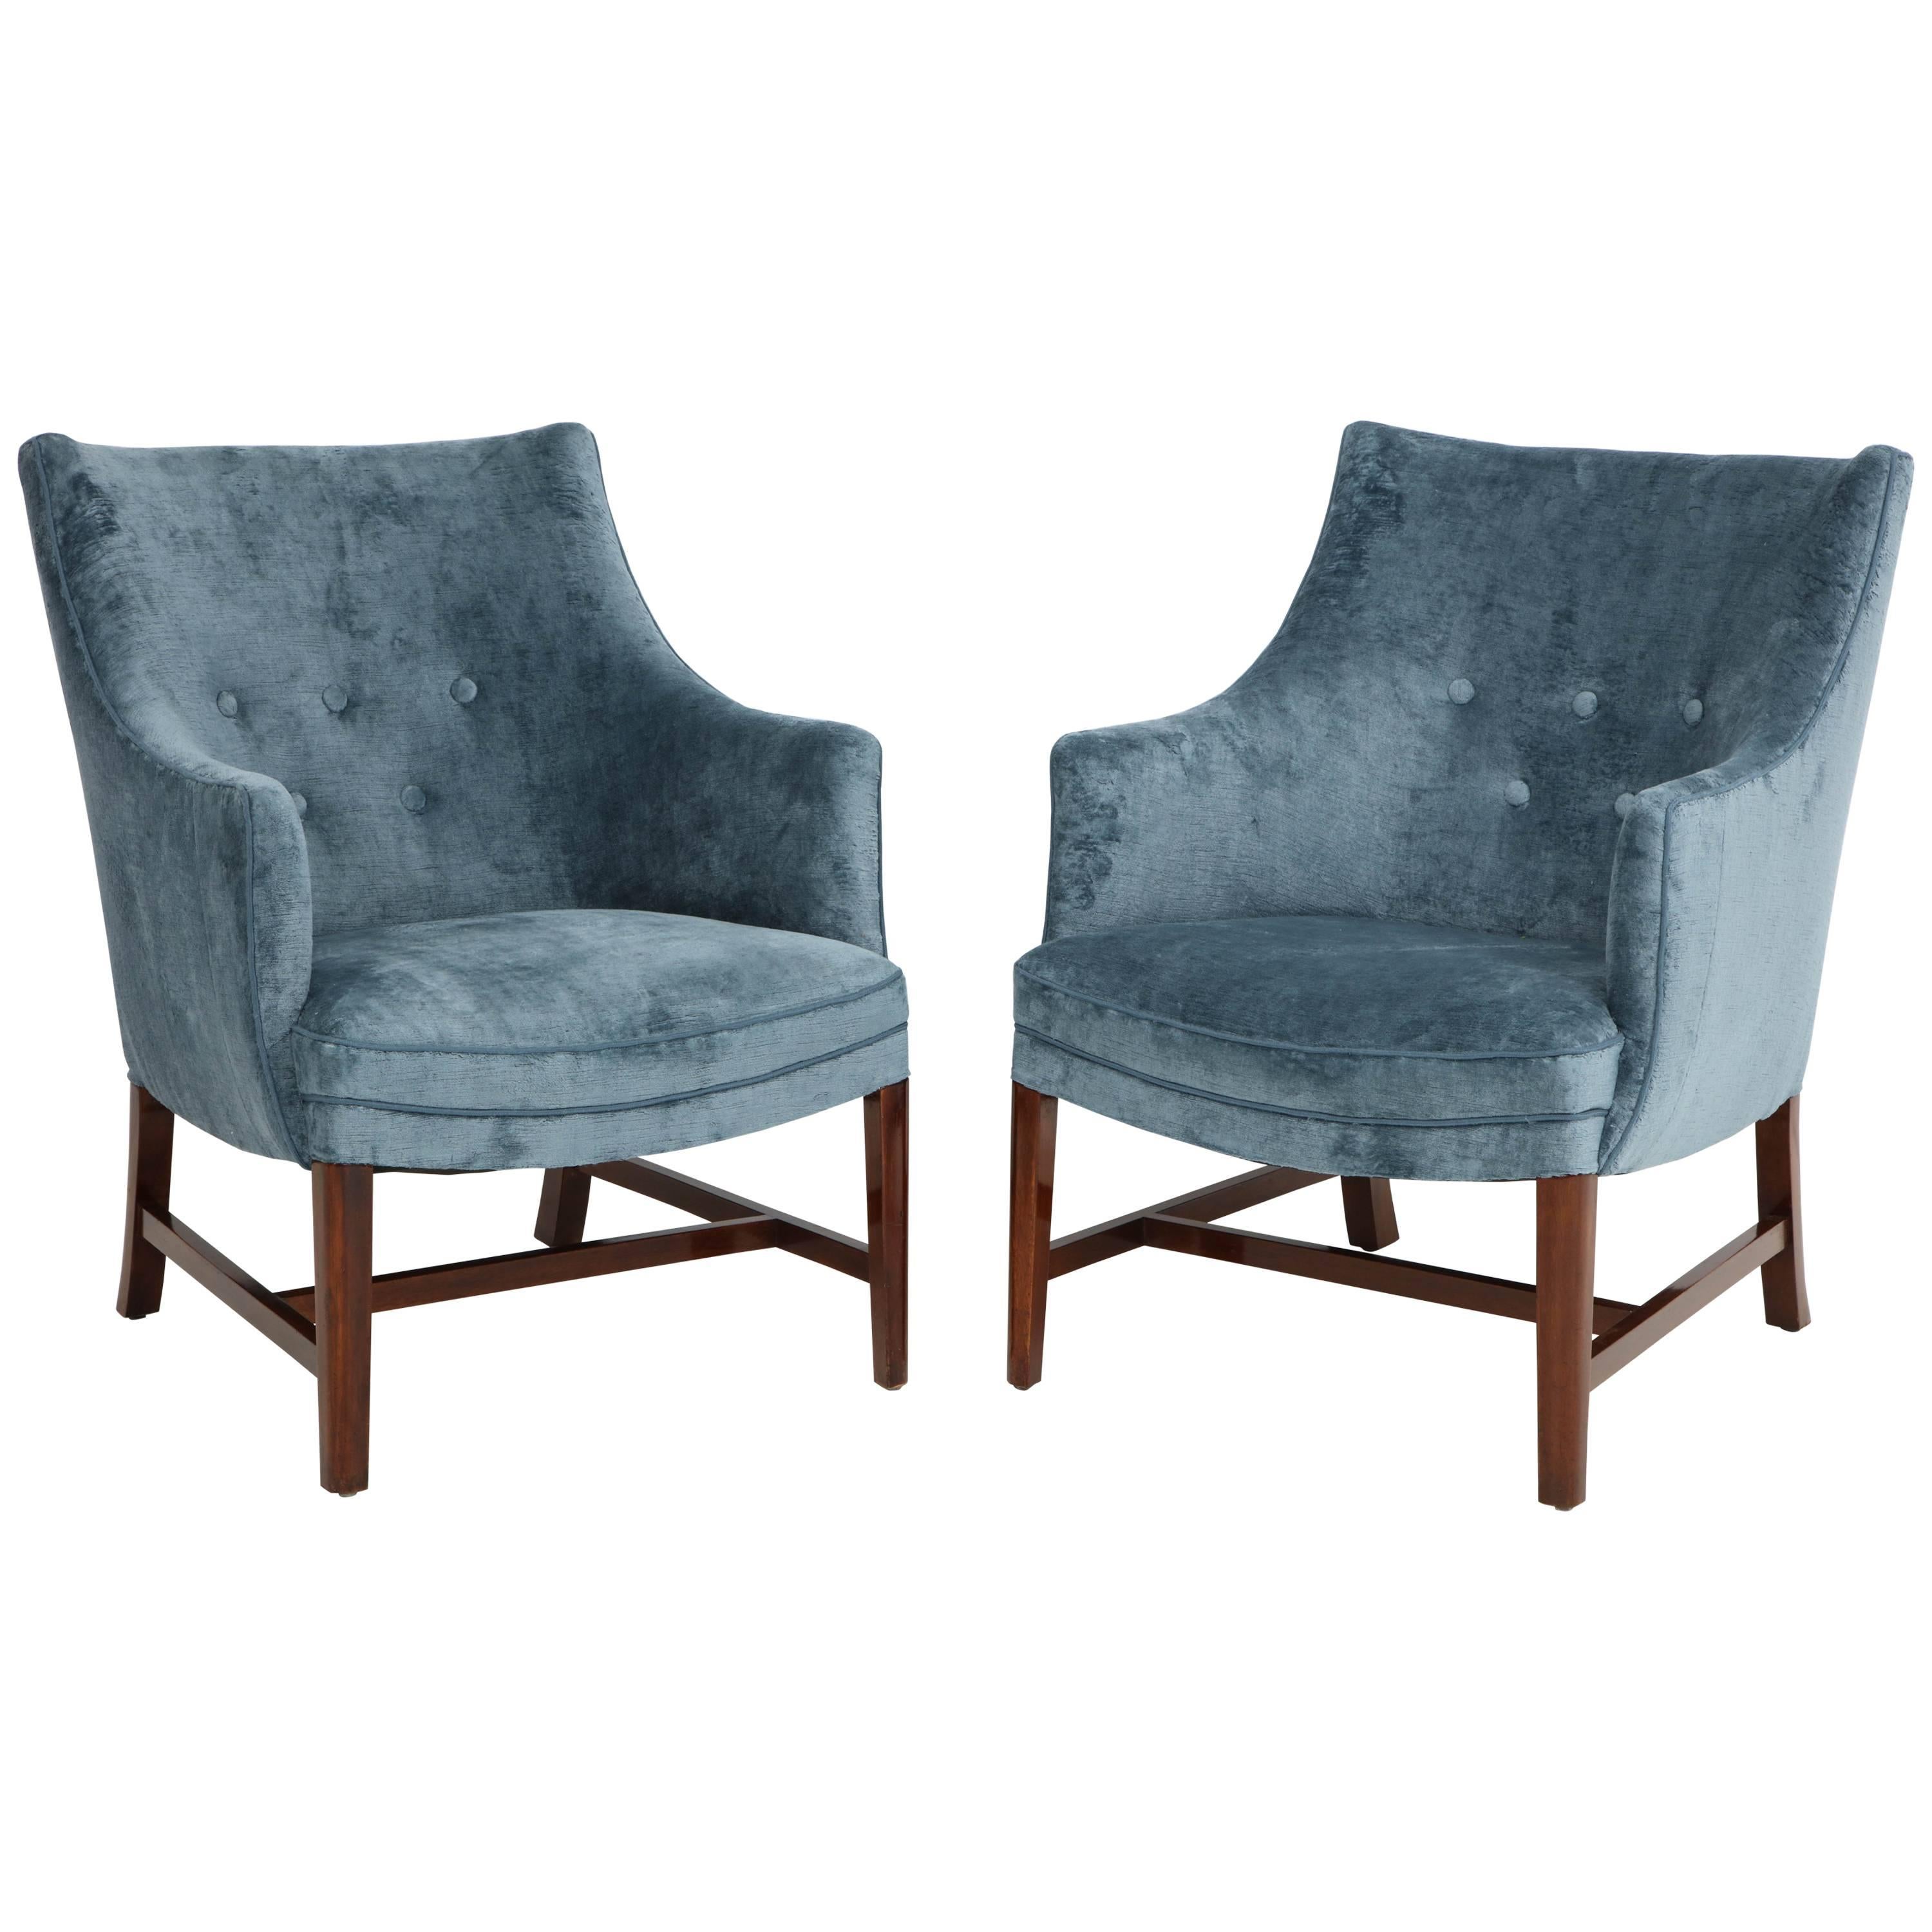 Pair of Frits Henningsen Upholstered Armchairs, circa 1940s